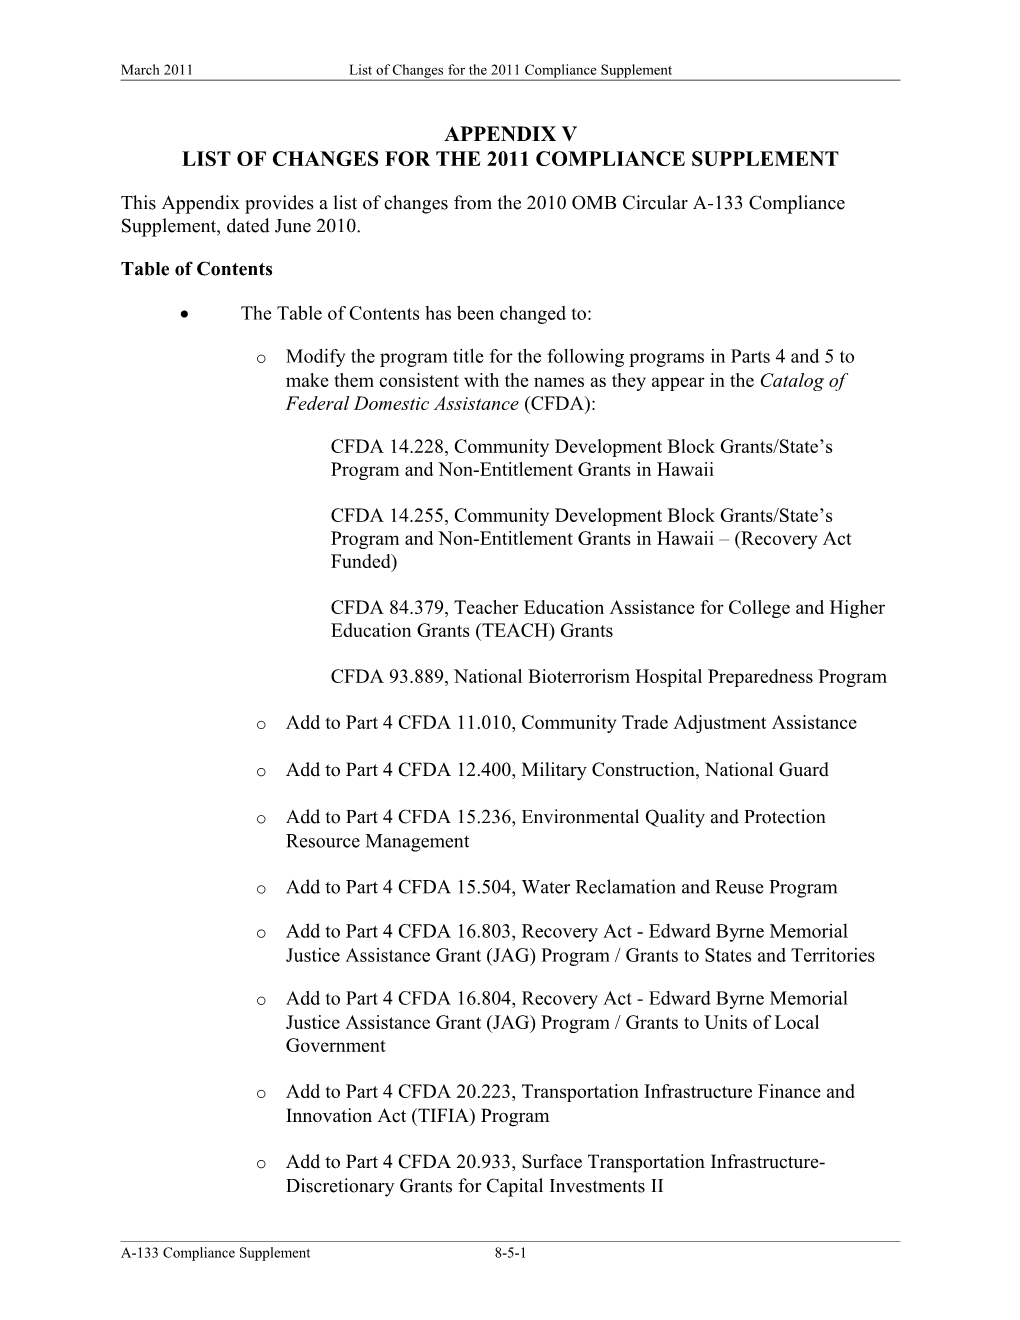 List of Changes for the 2011 Compliance Supplement